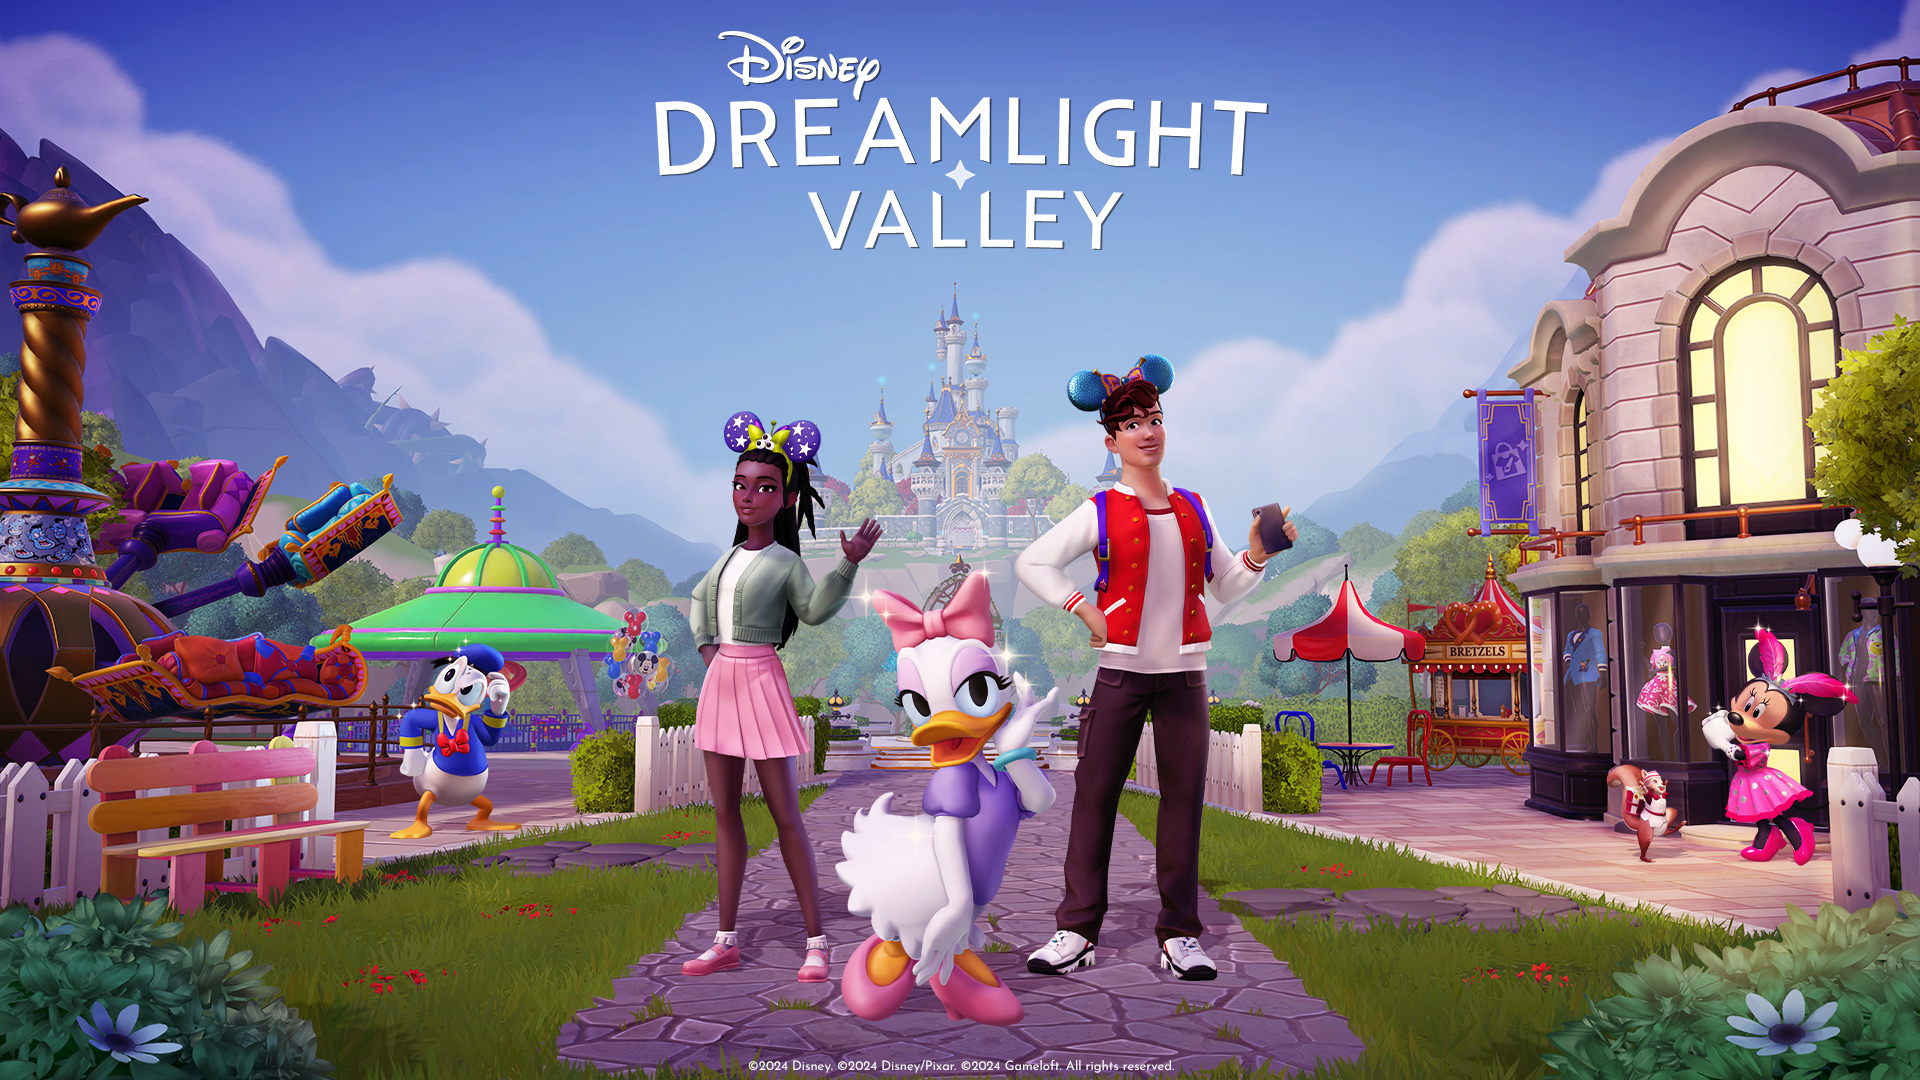 Daisy Duck arrives with Disney Parks in big Disney Dreamlight Valley update